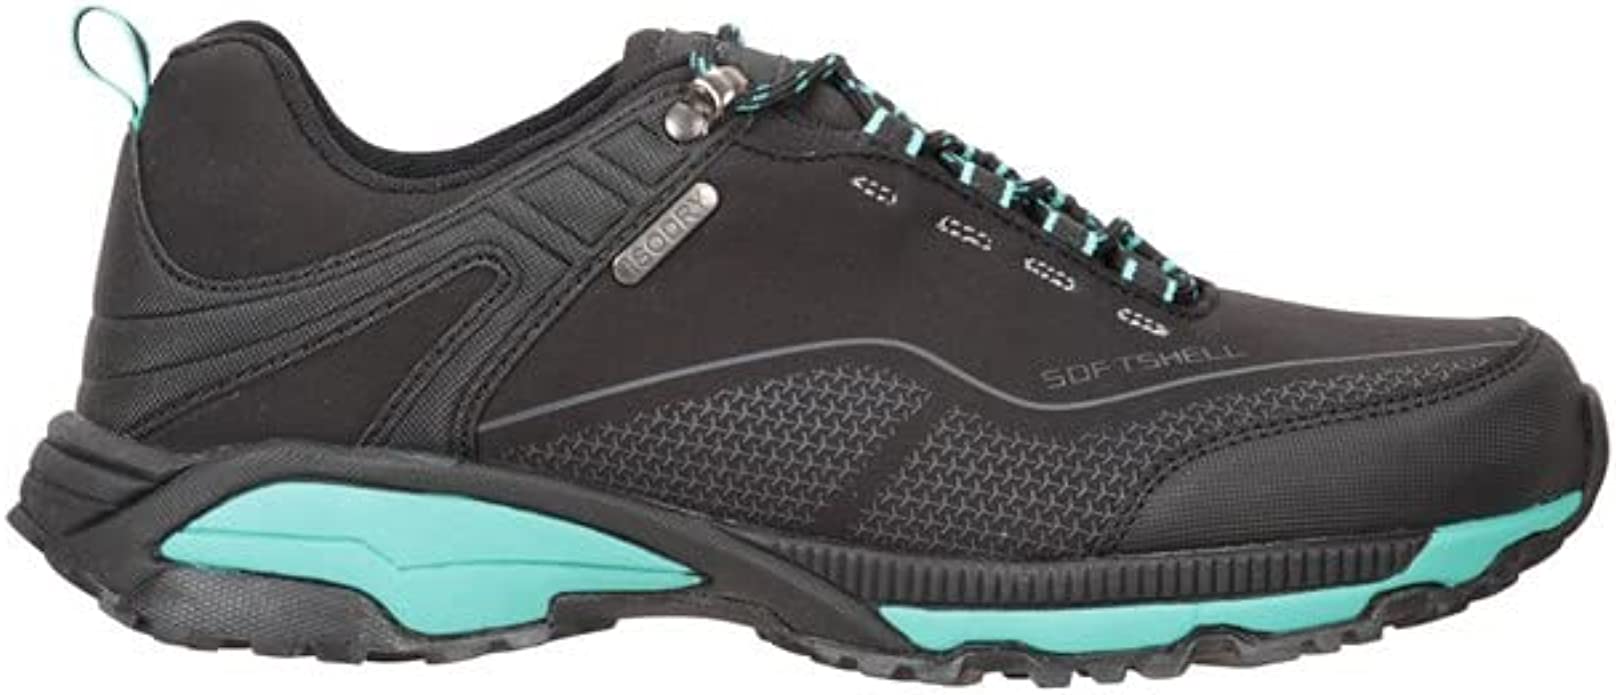 Side view of Mountain Warehouse Collie Women's Waterproof Hiking Shoes. Image credit: Amazon